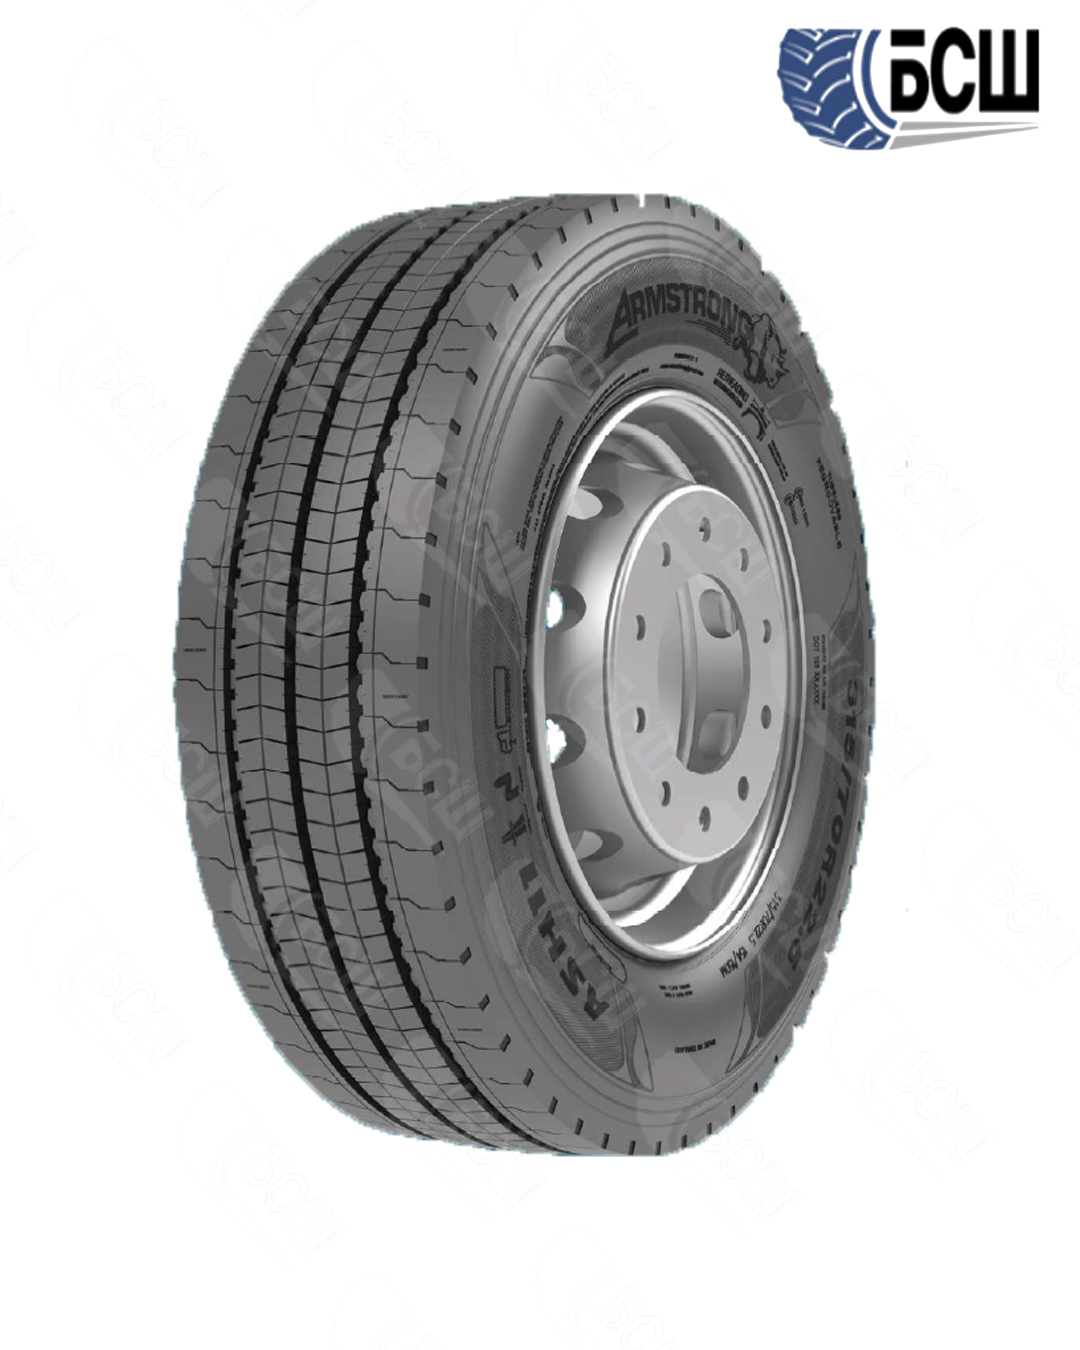 Шина 295/80R22.5/18 ASH11 ARMSTRONG 154/149M M+S 3PMSF TL(T)